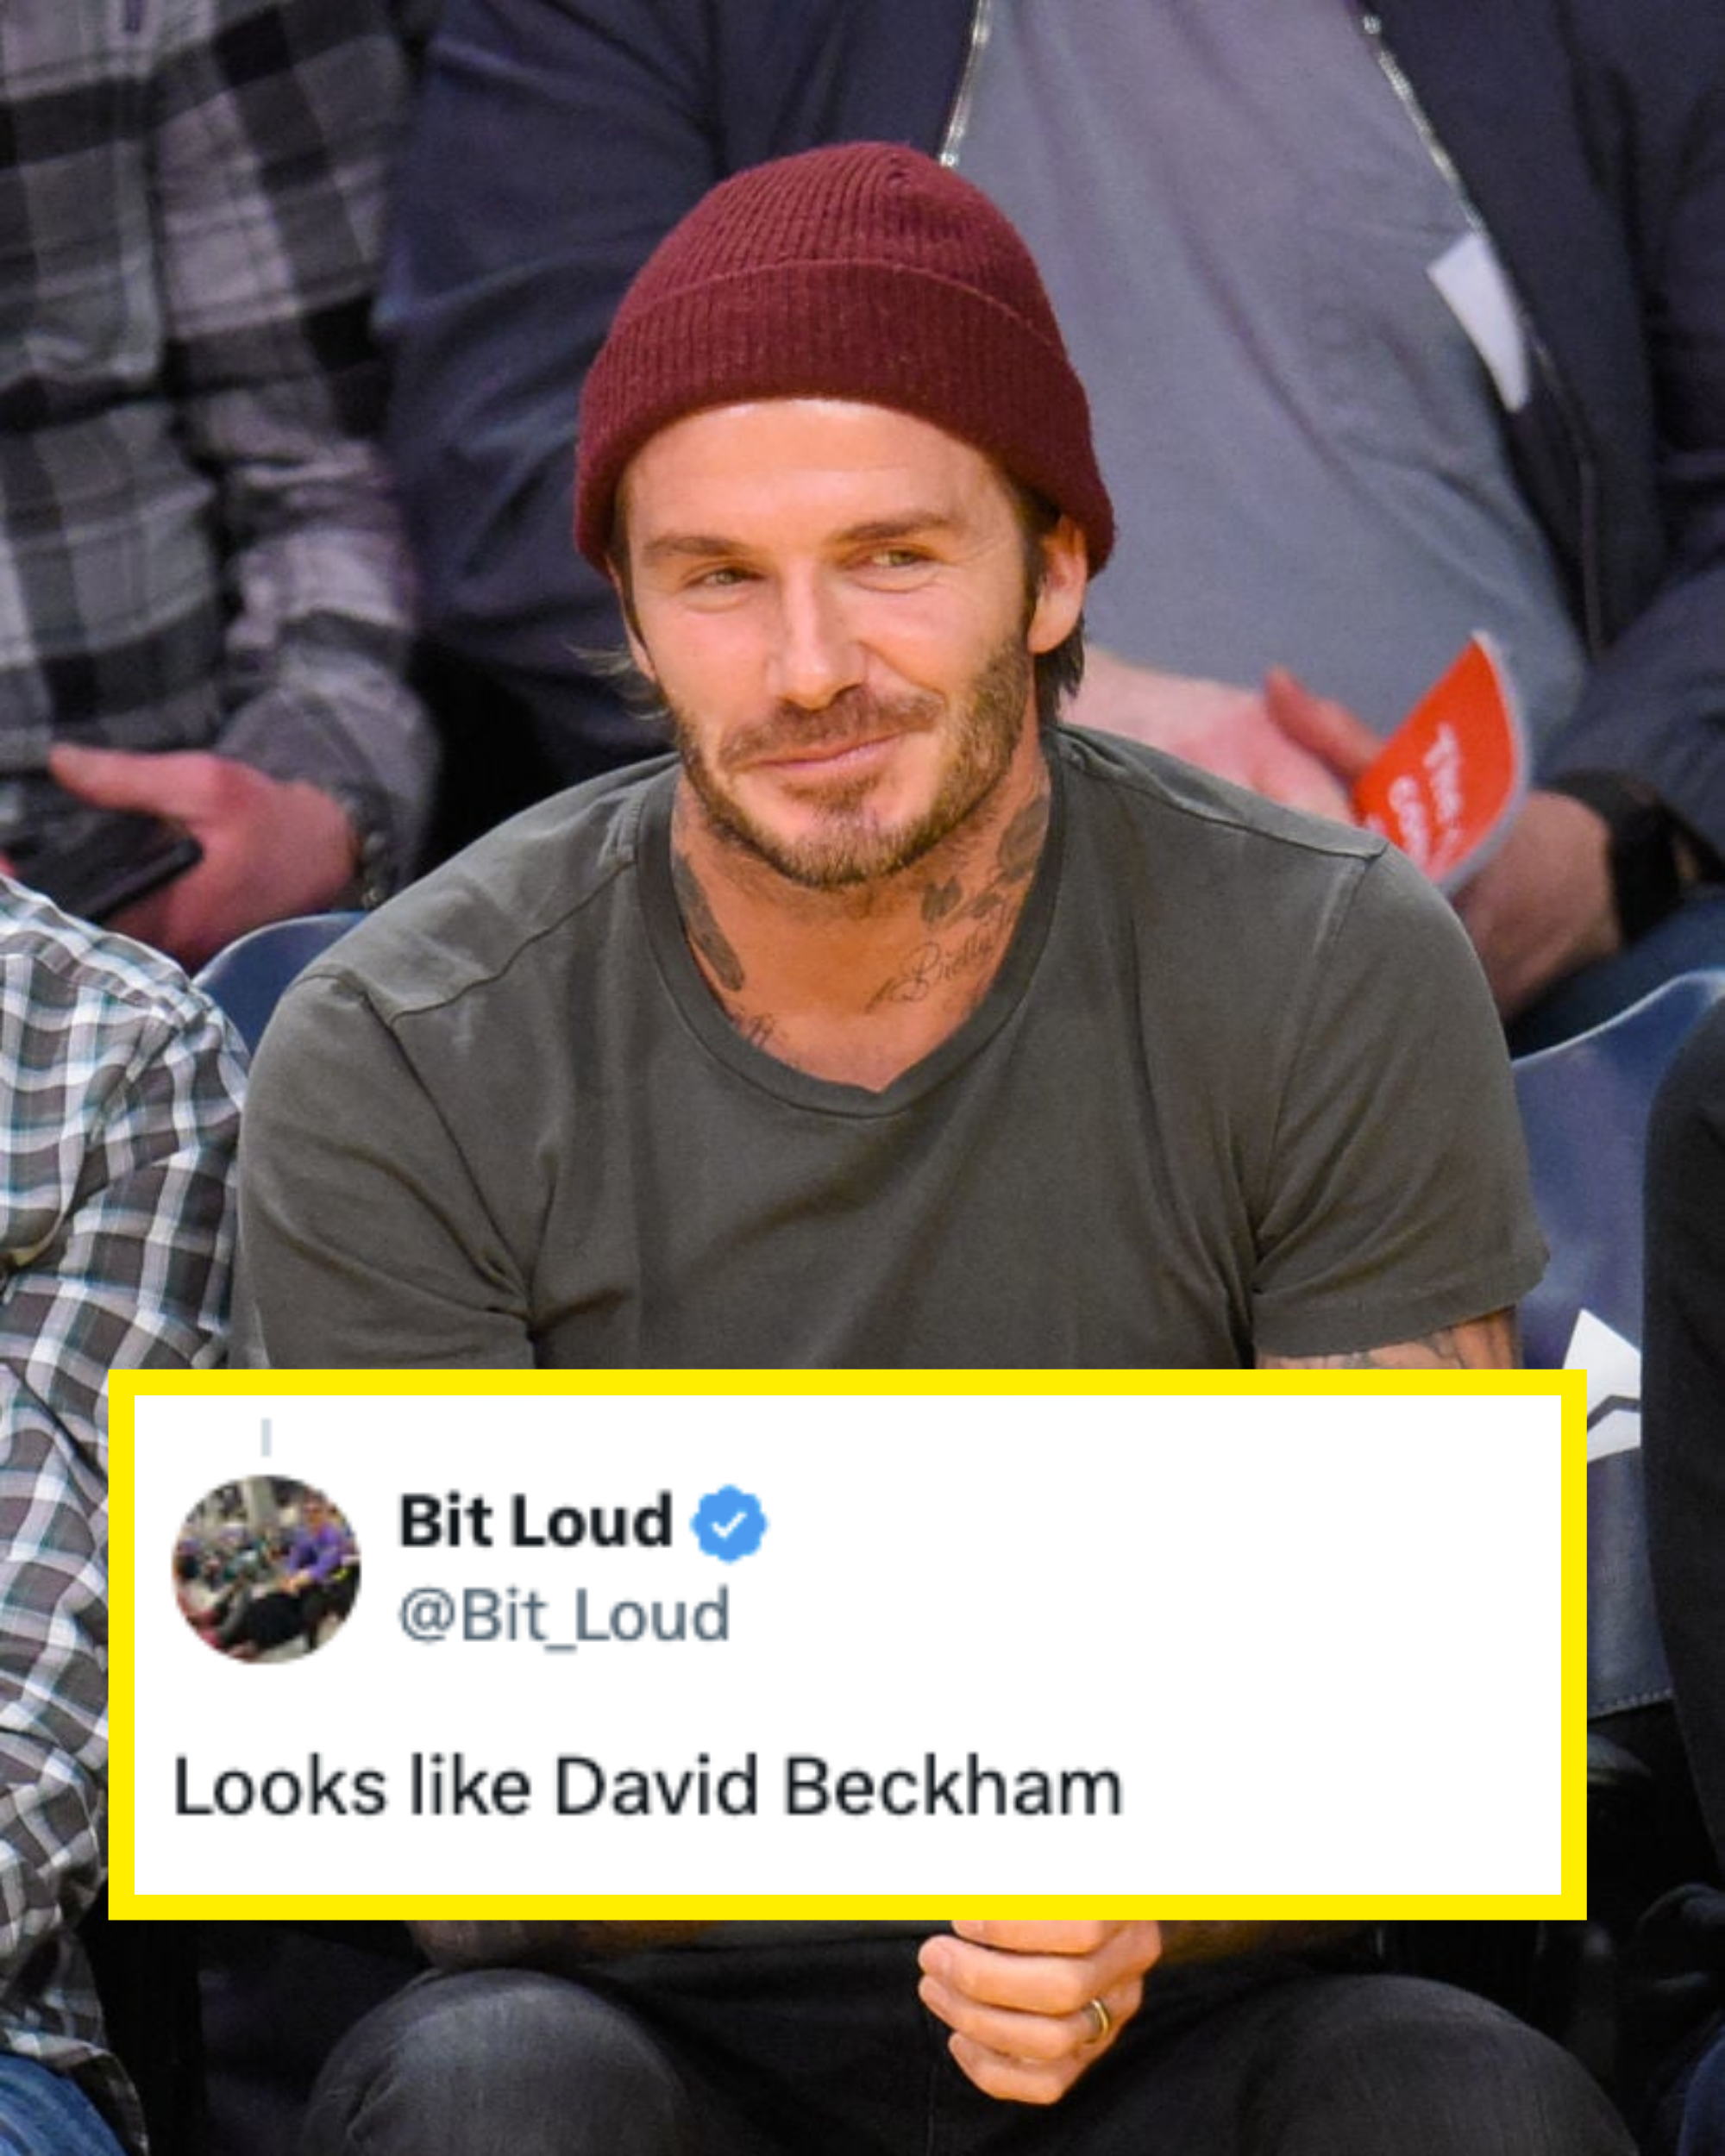 David Beckham smiling, seated, wearing a beanie and a casual shirt at a sports event